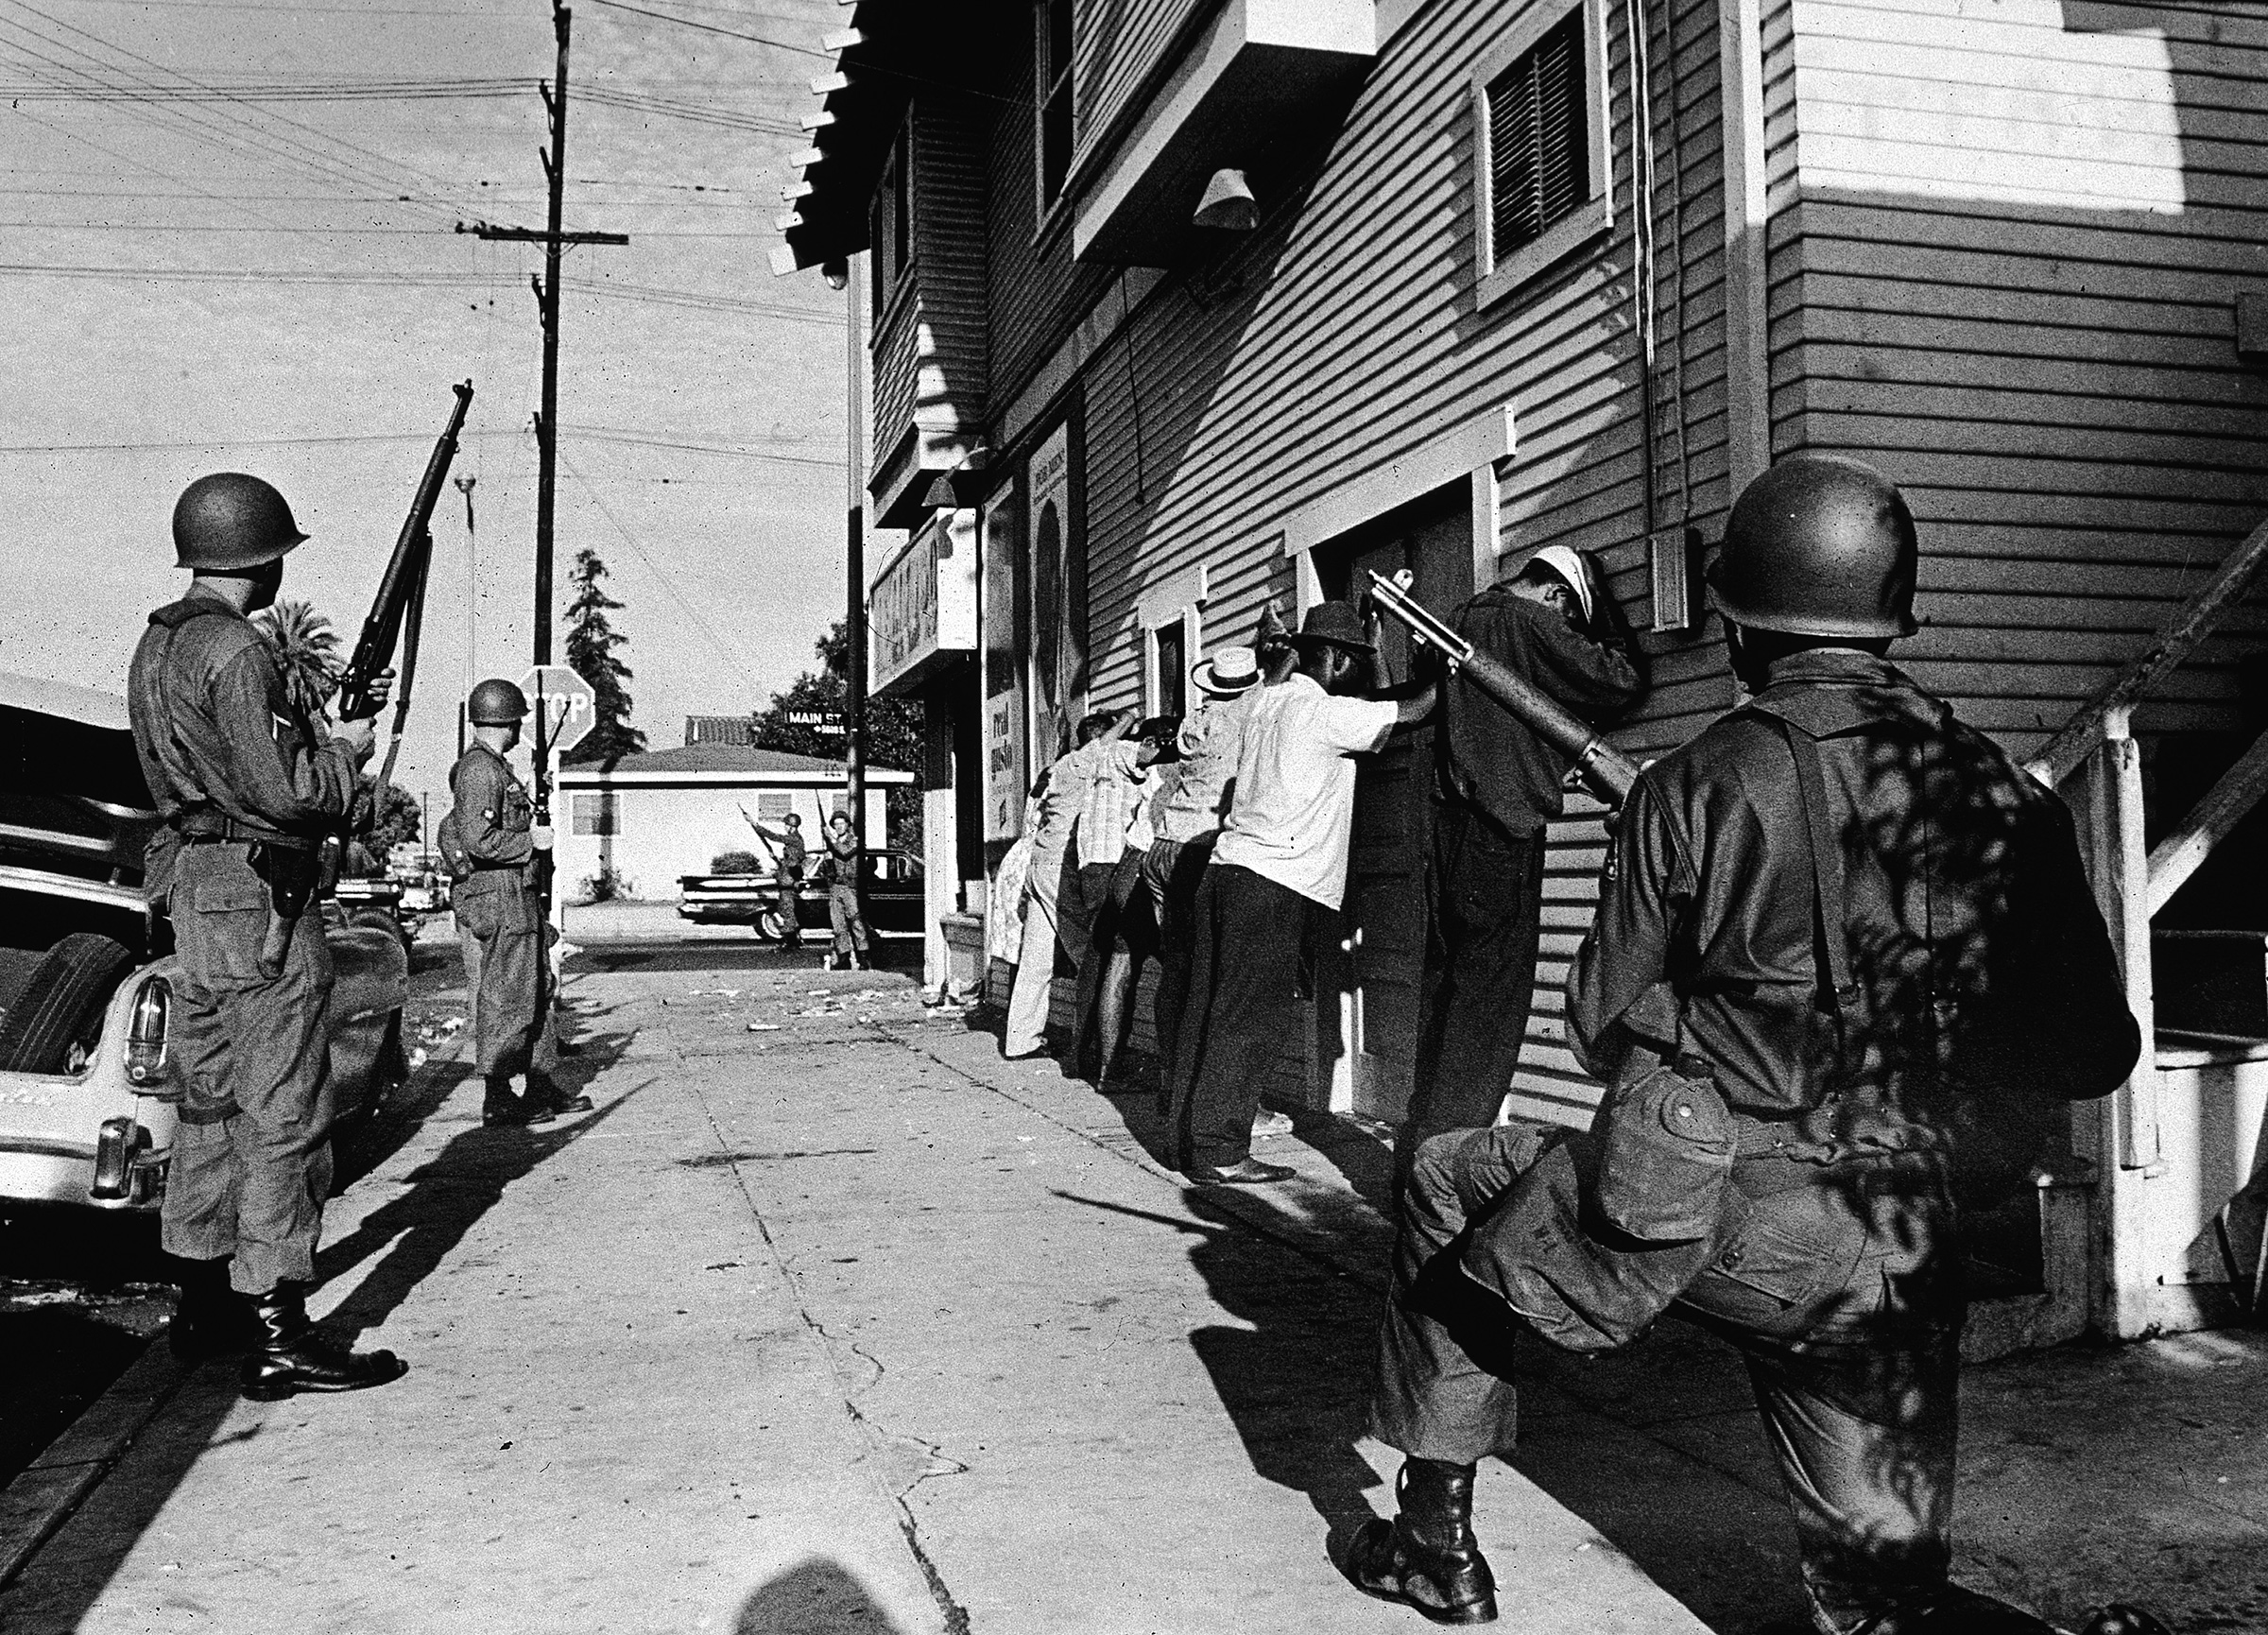 Armed National Guardsmen force a line of Black men to stand against the wall of a building during the Watts riots